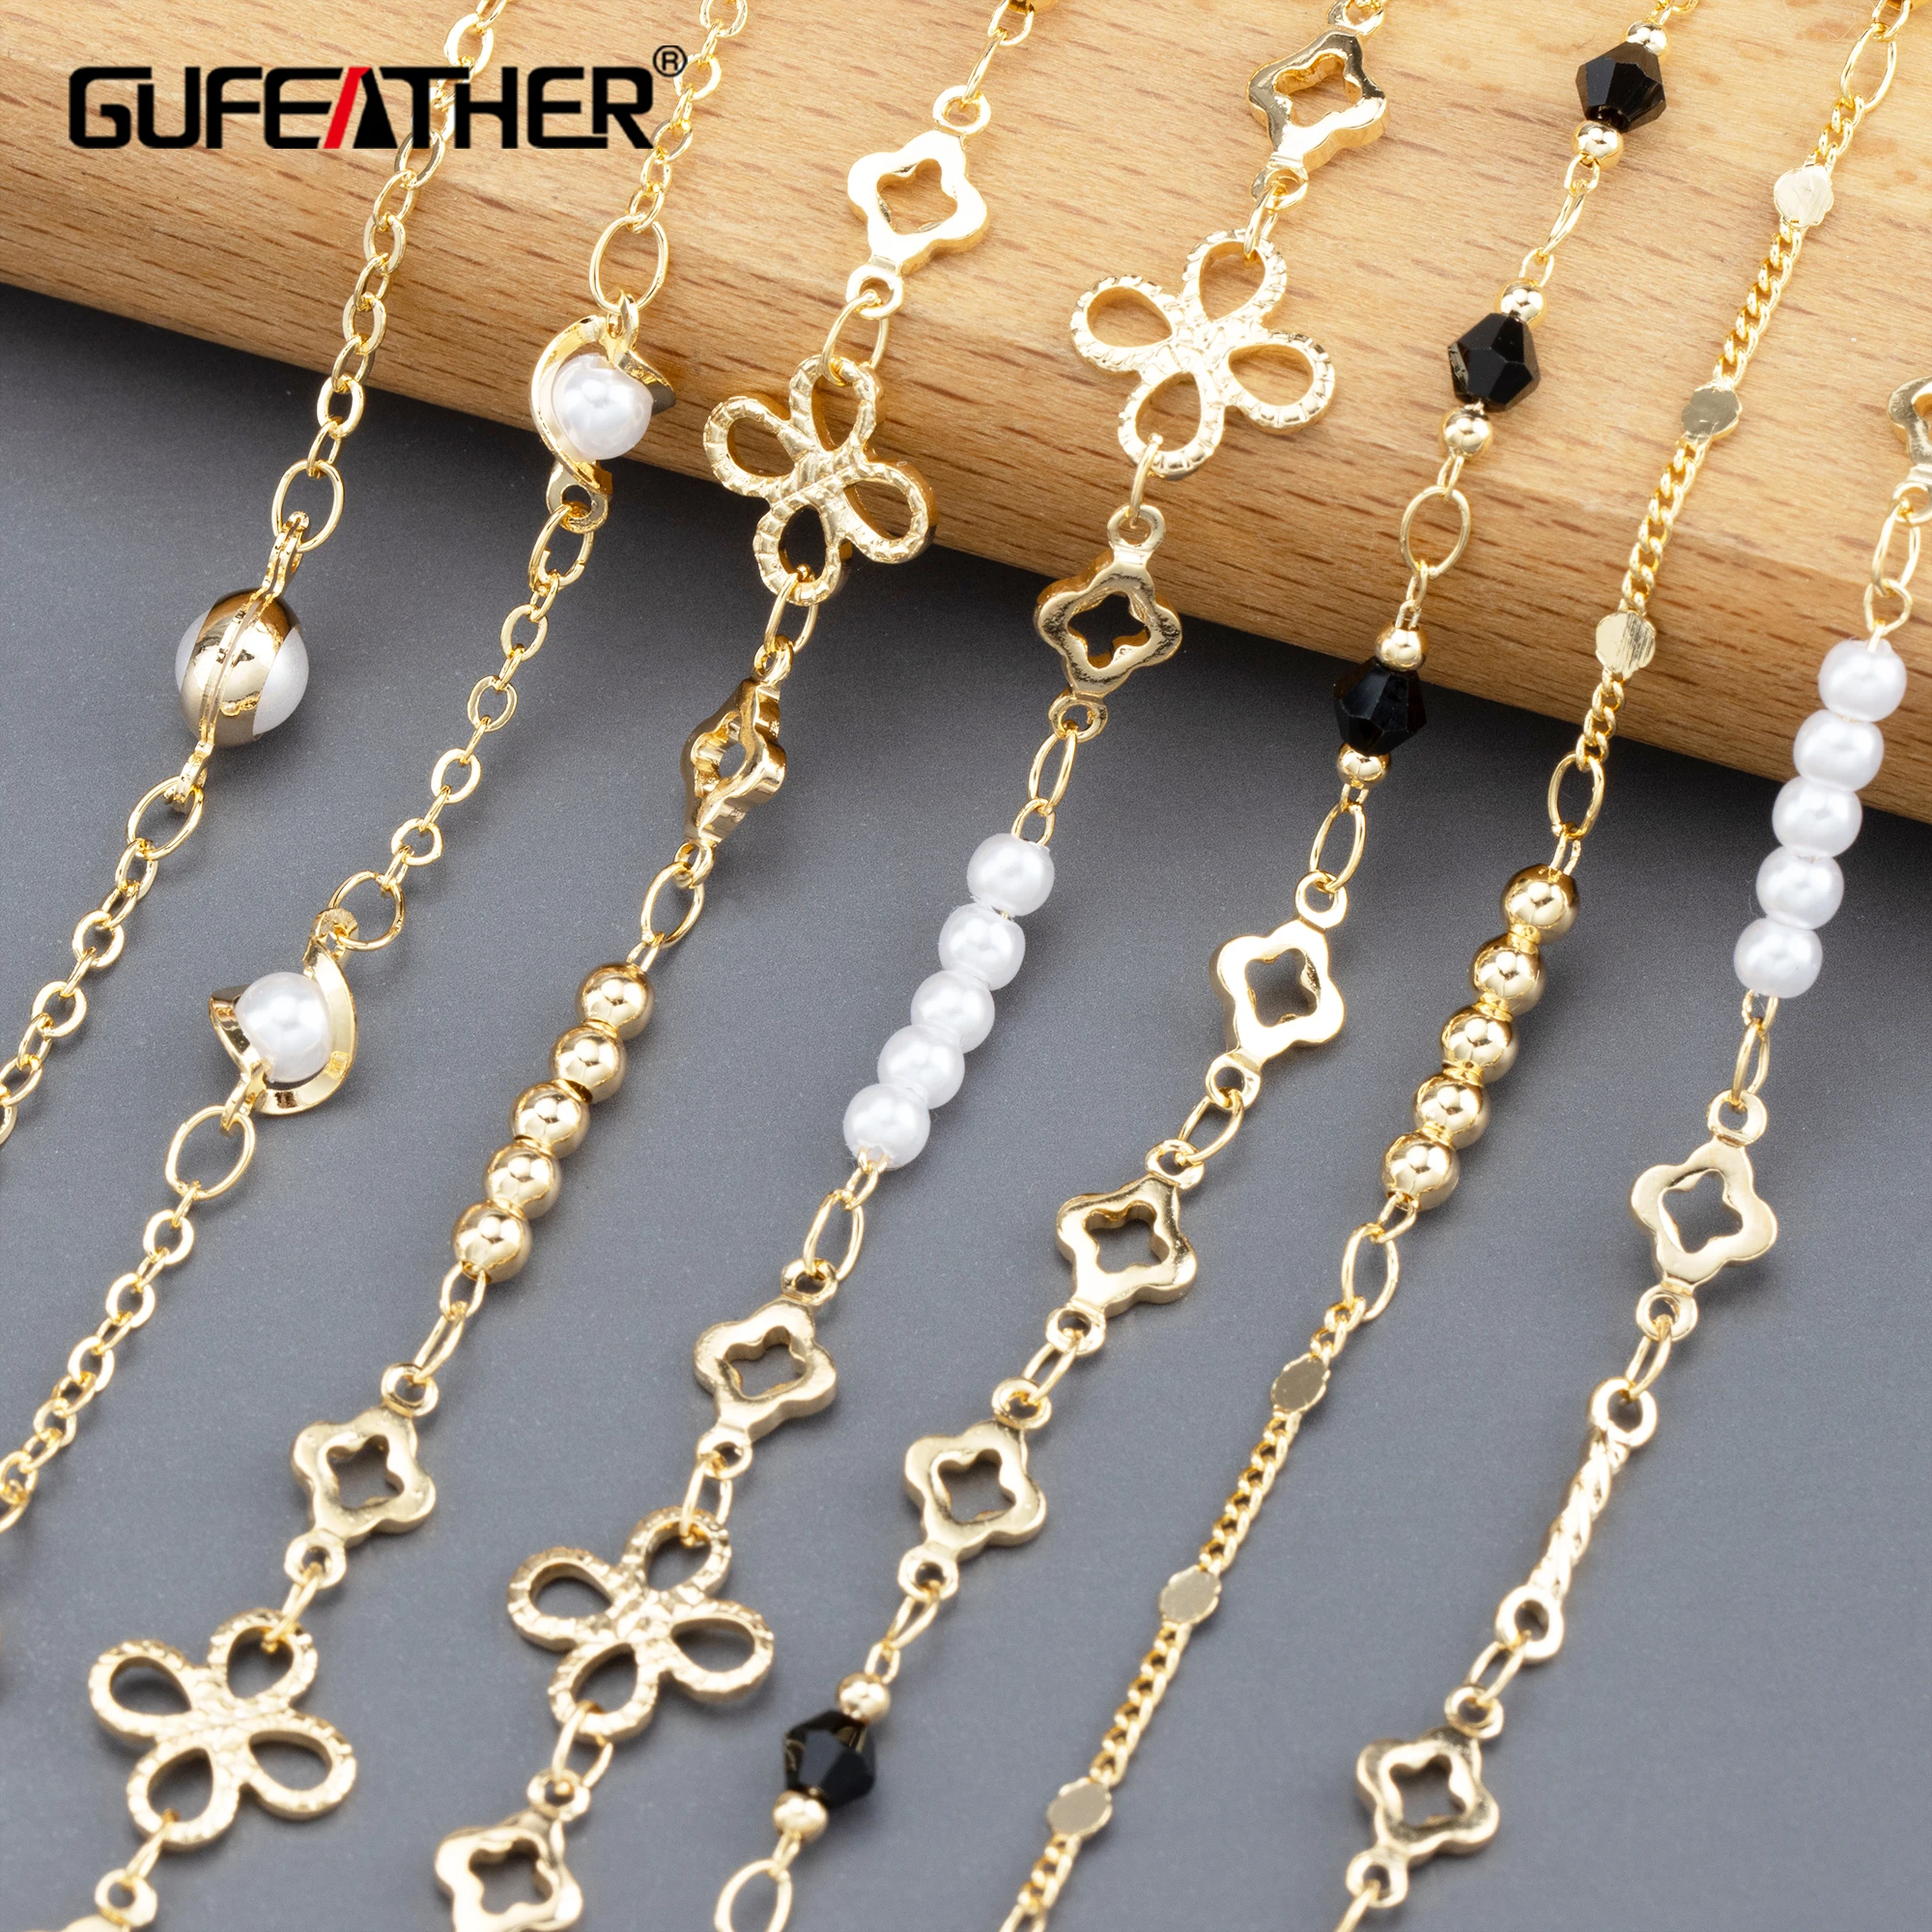 GUFEATHER C281,diy chain,pass REACH,nickel free,18k gold plated,copper,plastic pearl,diy bracelet necklace,jewelry making,1m/lot